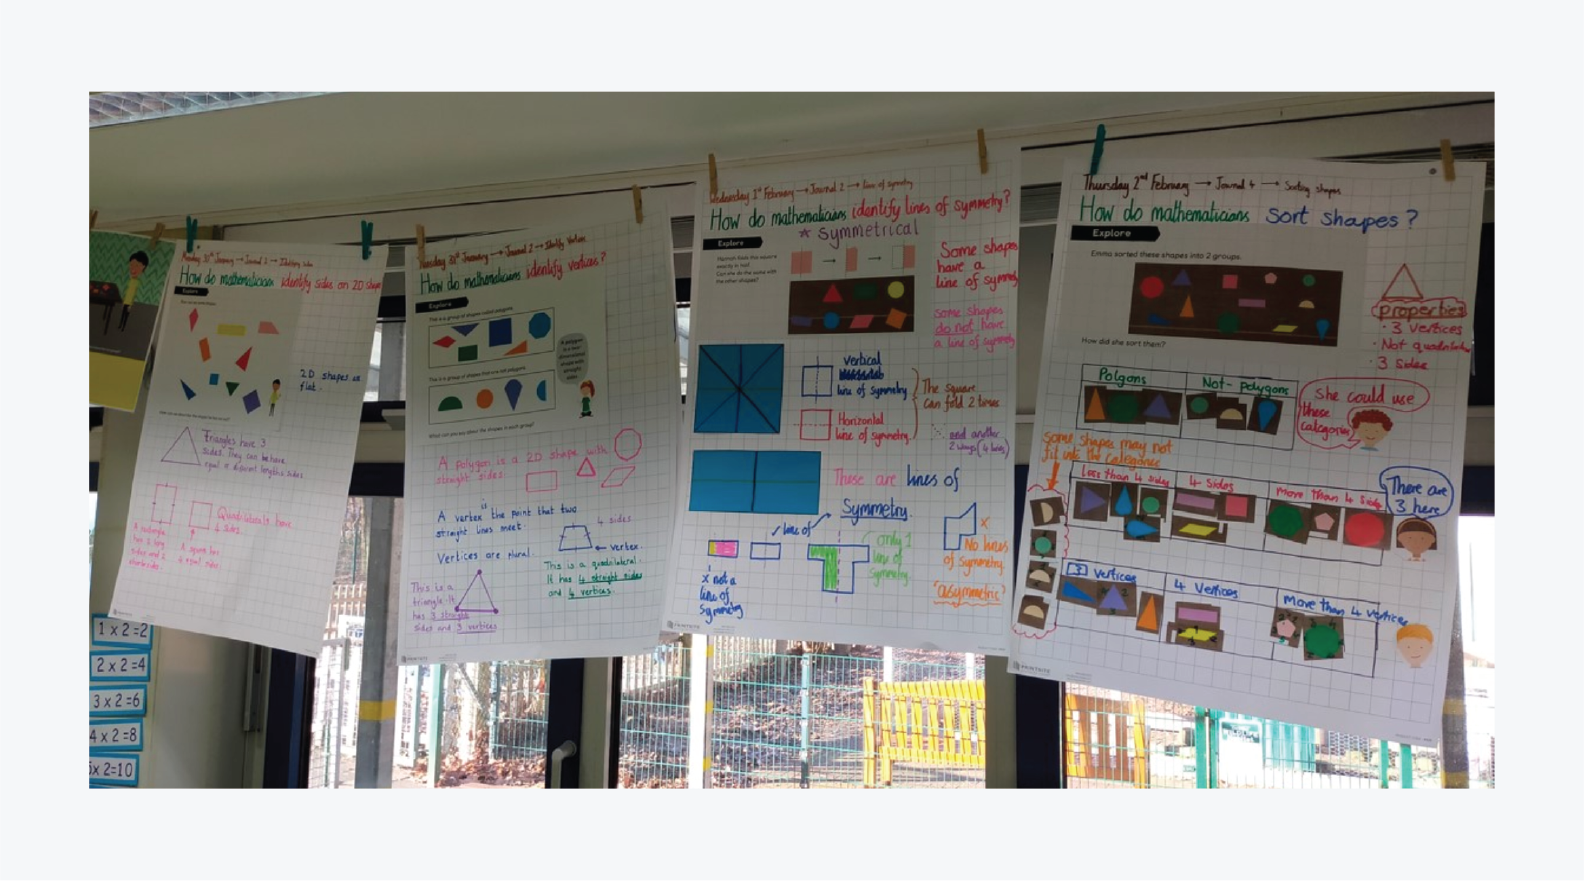 Anchor charts displayed in the classroom help pupils develop reasoning skills